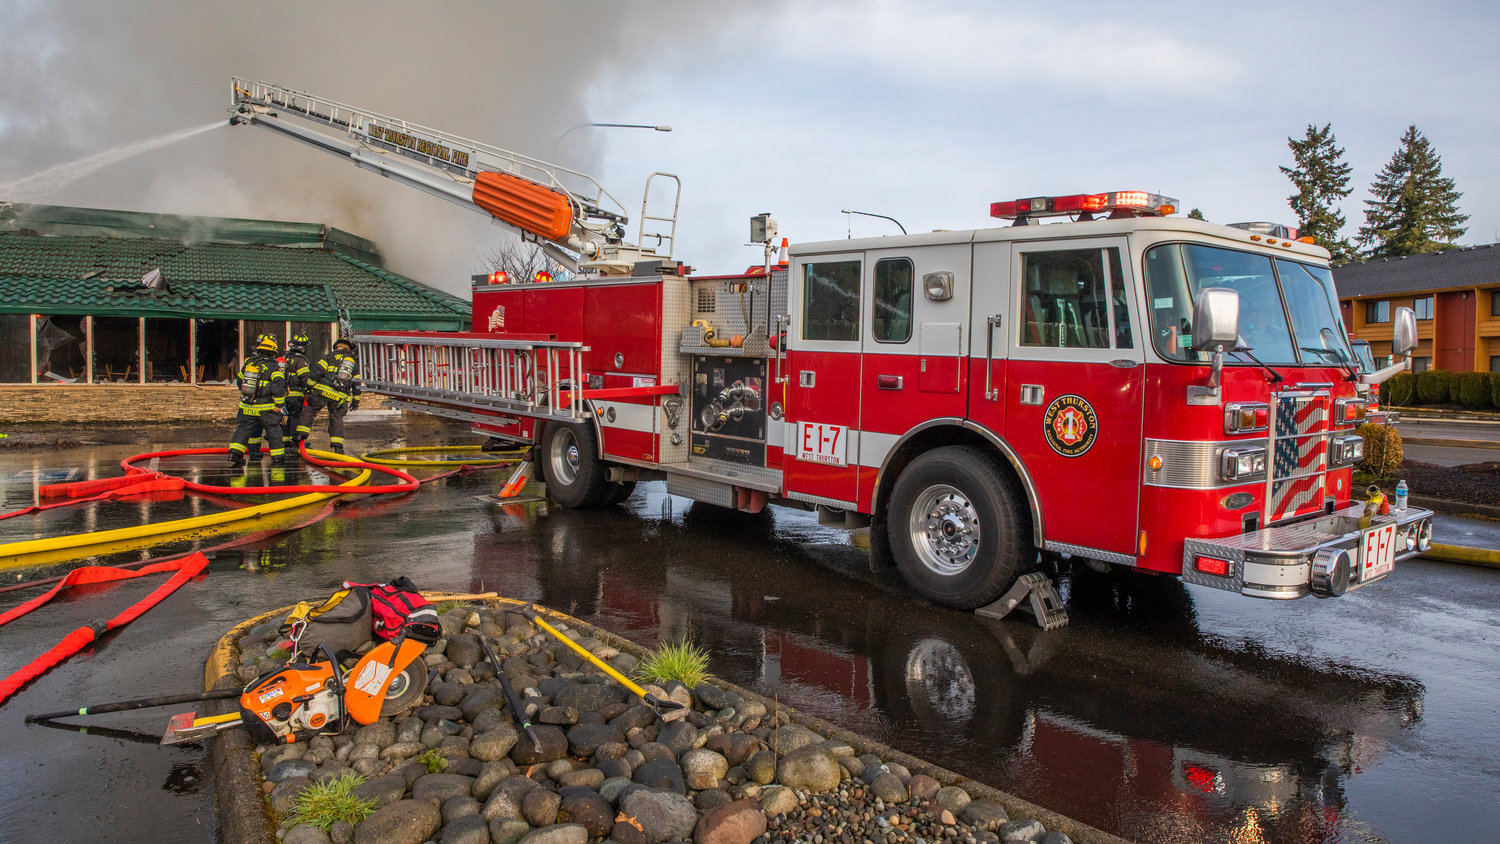 A West Thurston Fire engine sprays water down inside the former location of Papa Pete’s and Shari’s Cafe in Centralia while responding to a commercial structure fire on Sunday.